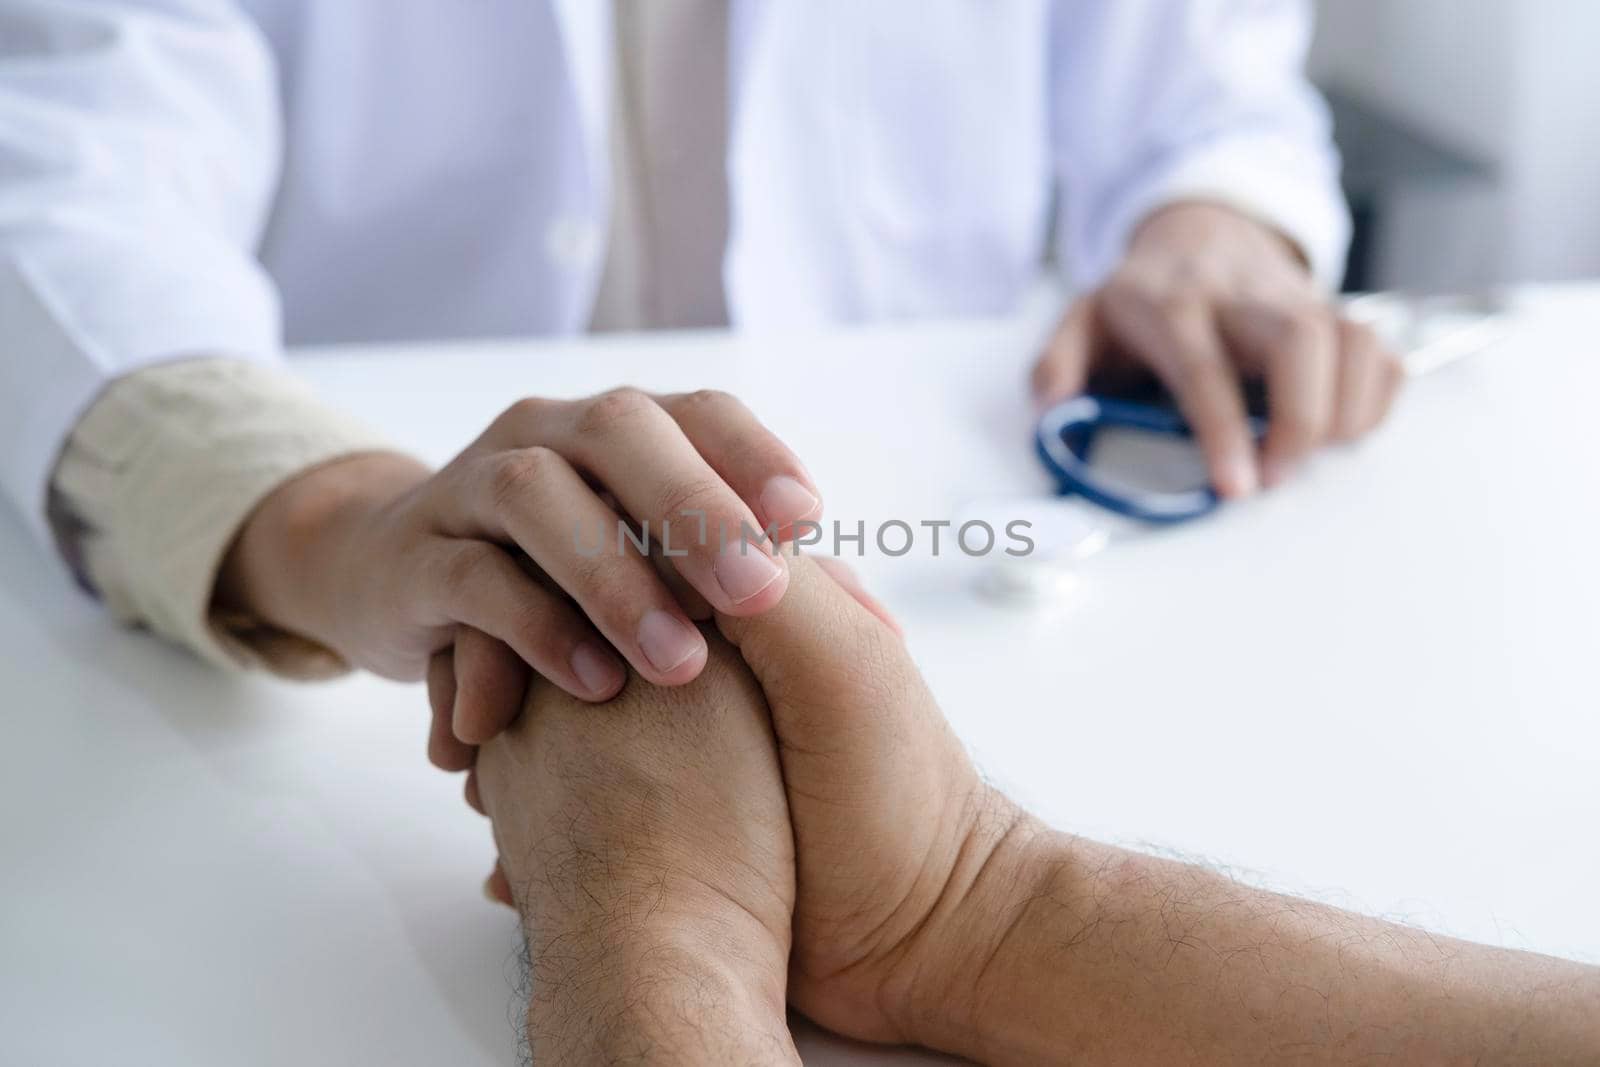 Doctor comforting patient at consulting room